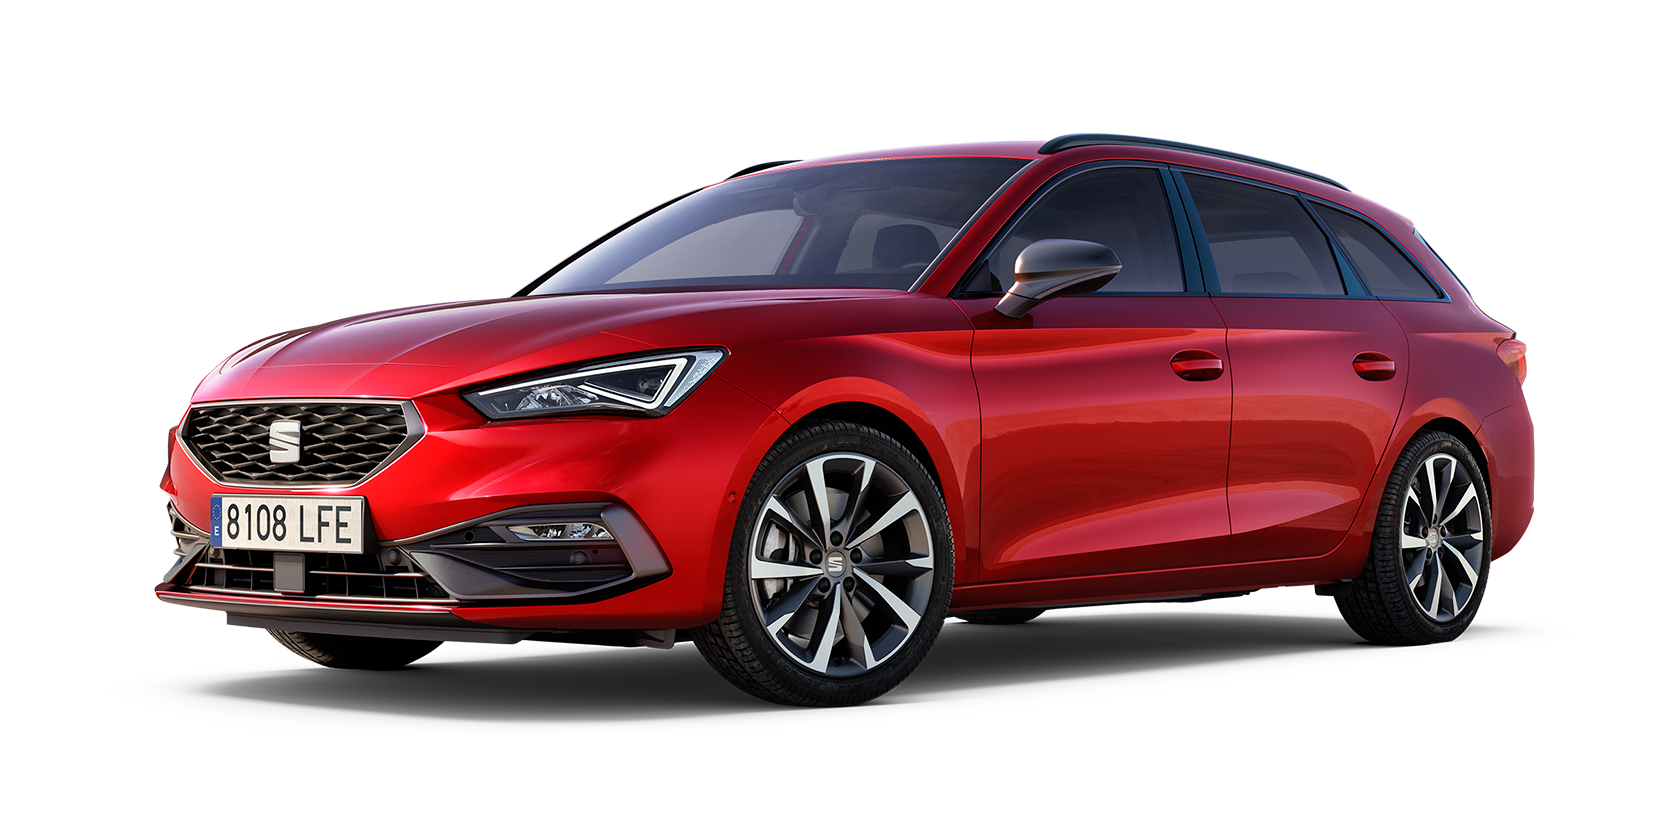 seat leon sportstourer fr trim desire red colour with machined alloy wheels